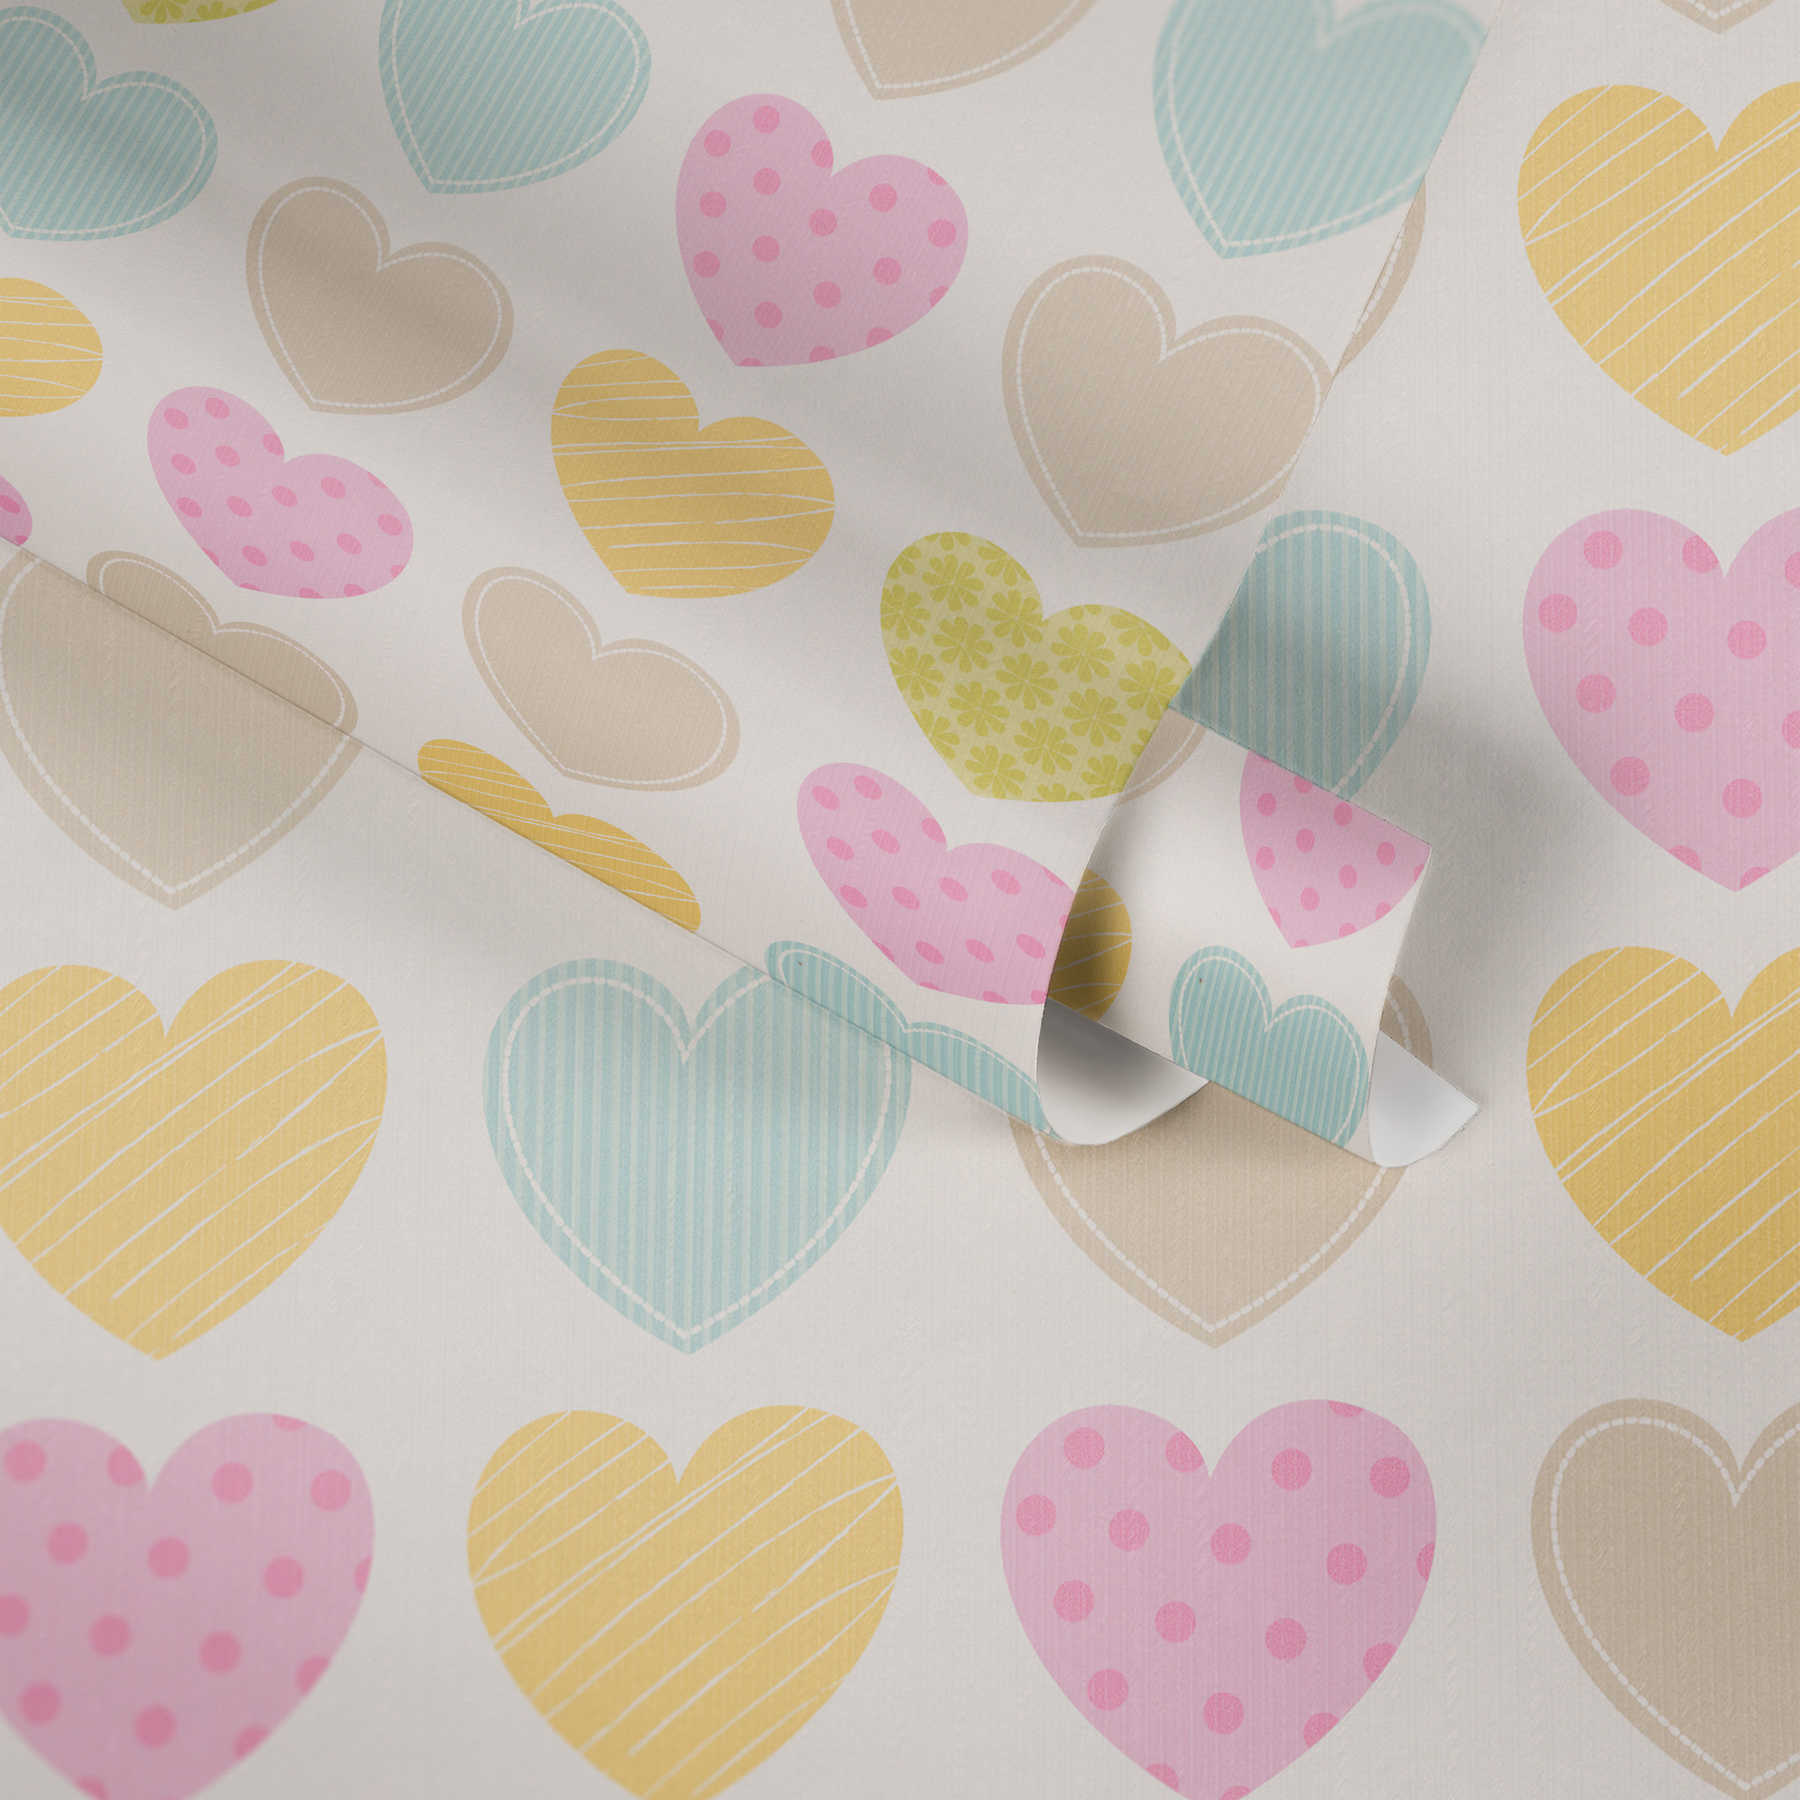             Pastel wallpaper with hearts for Nursery - colourful, white
        